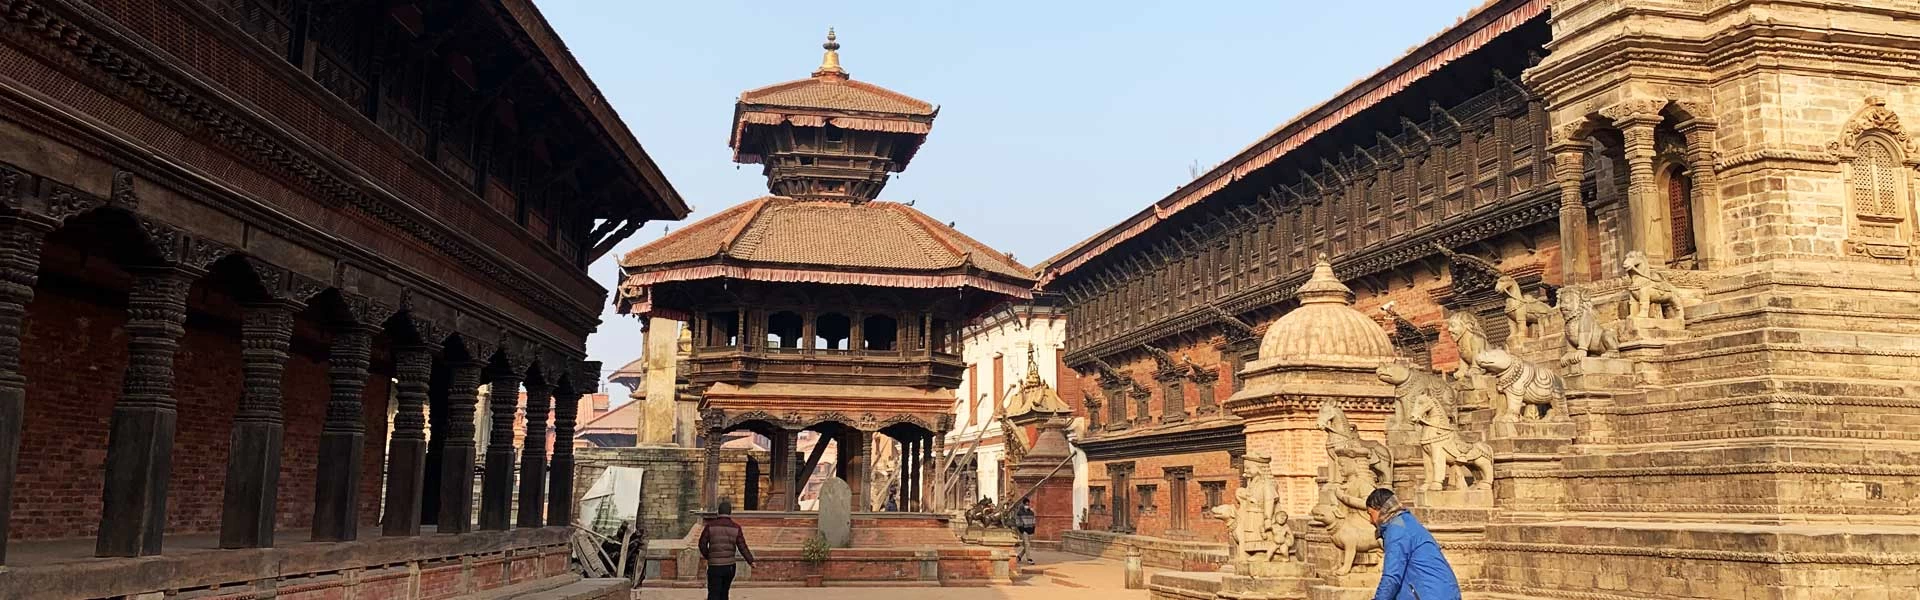 Bhaktapur Durbar square is one of the oldest king's palace among the other in Kathmandu Valley.